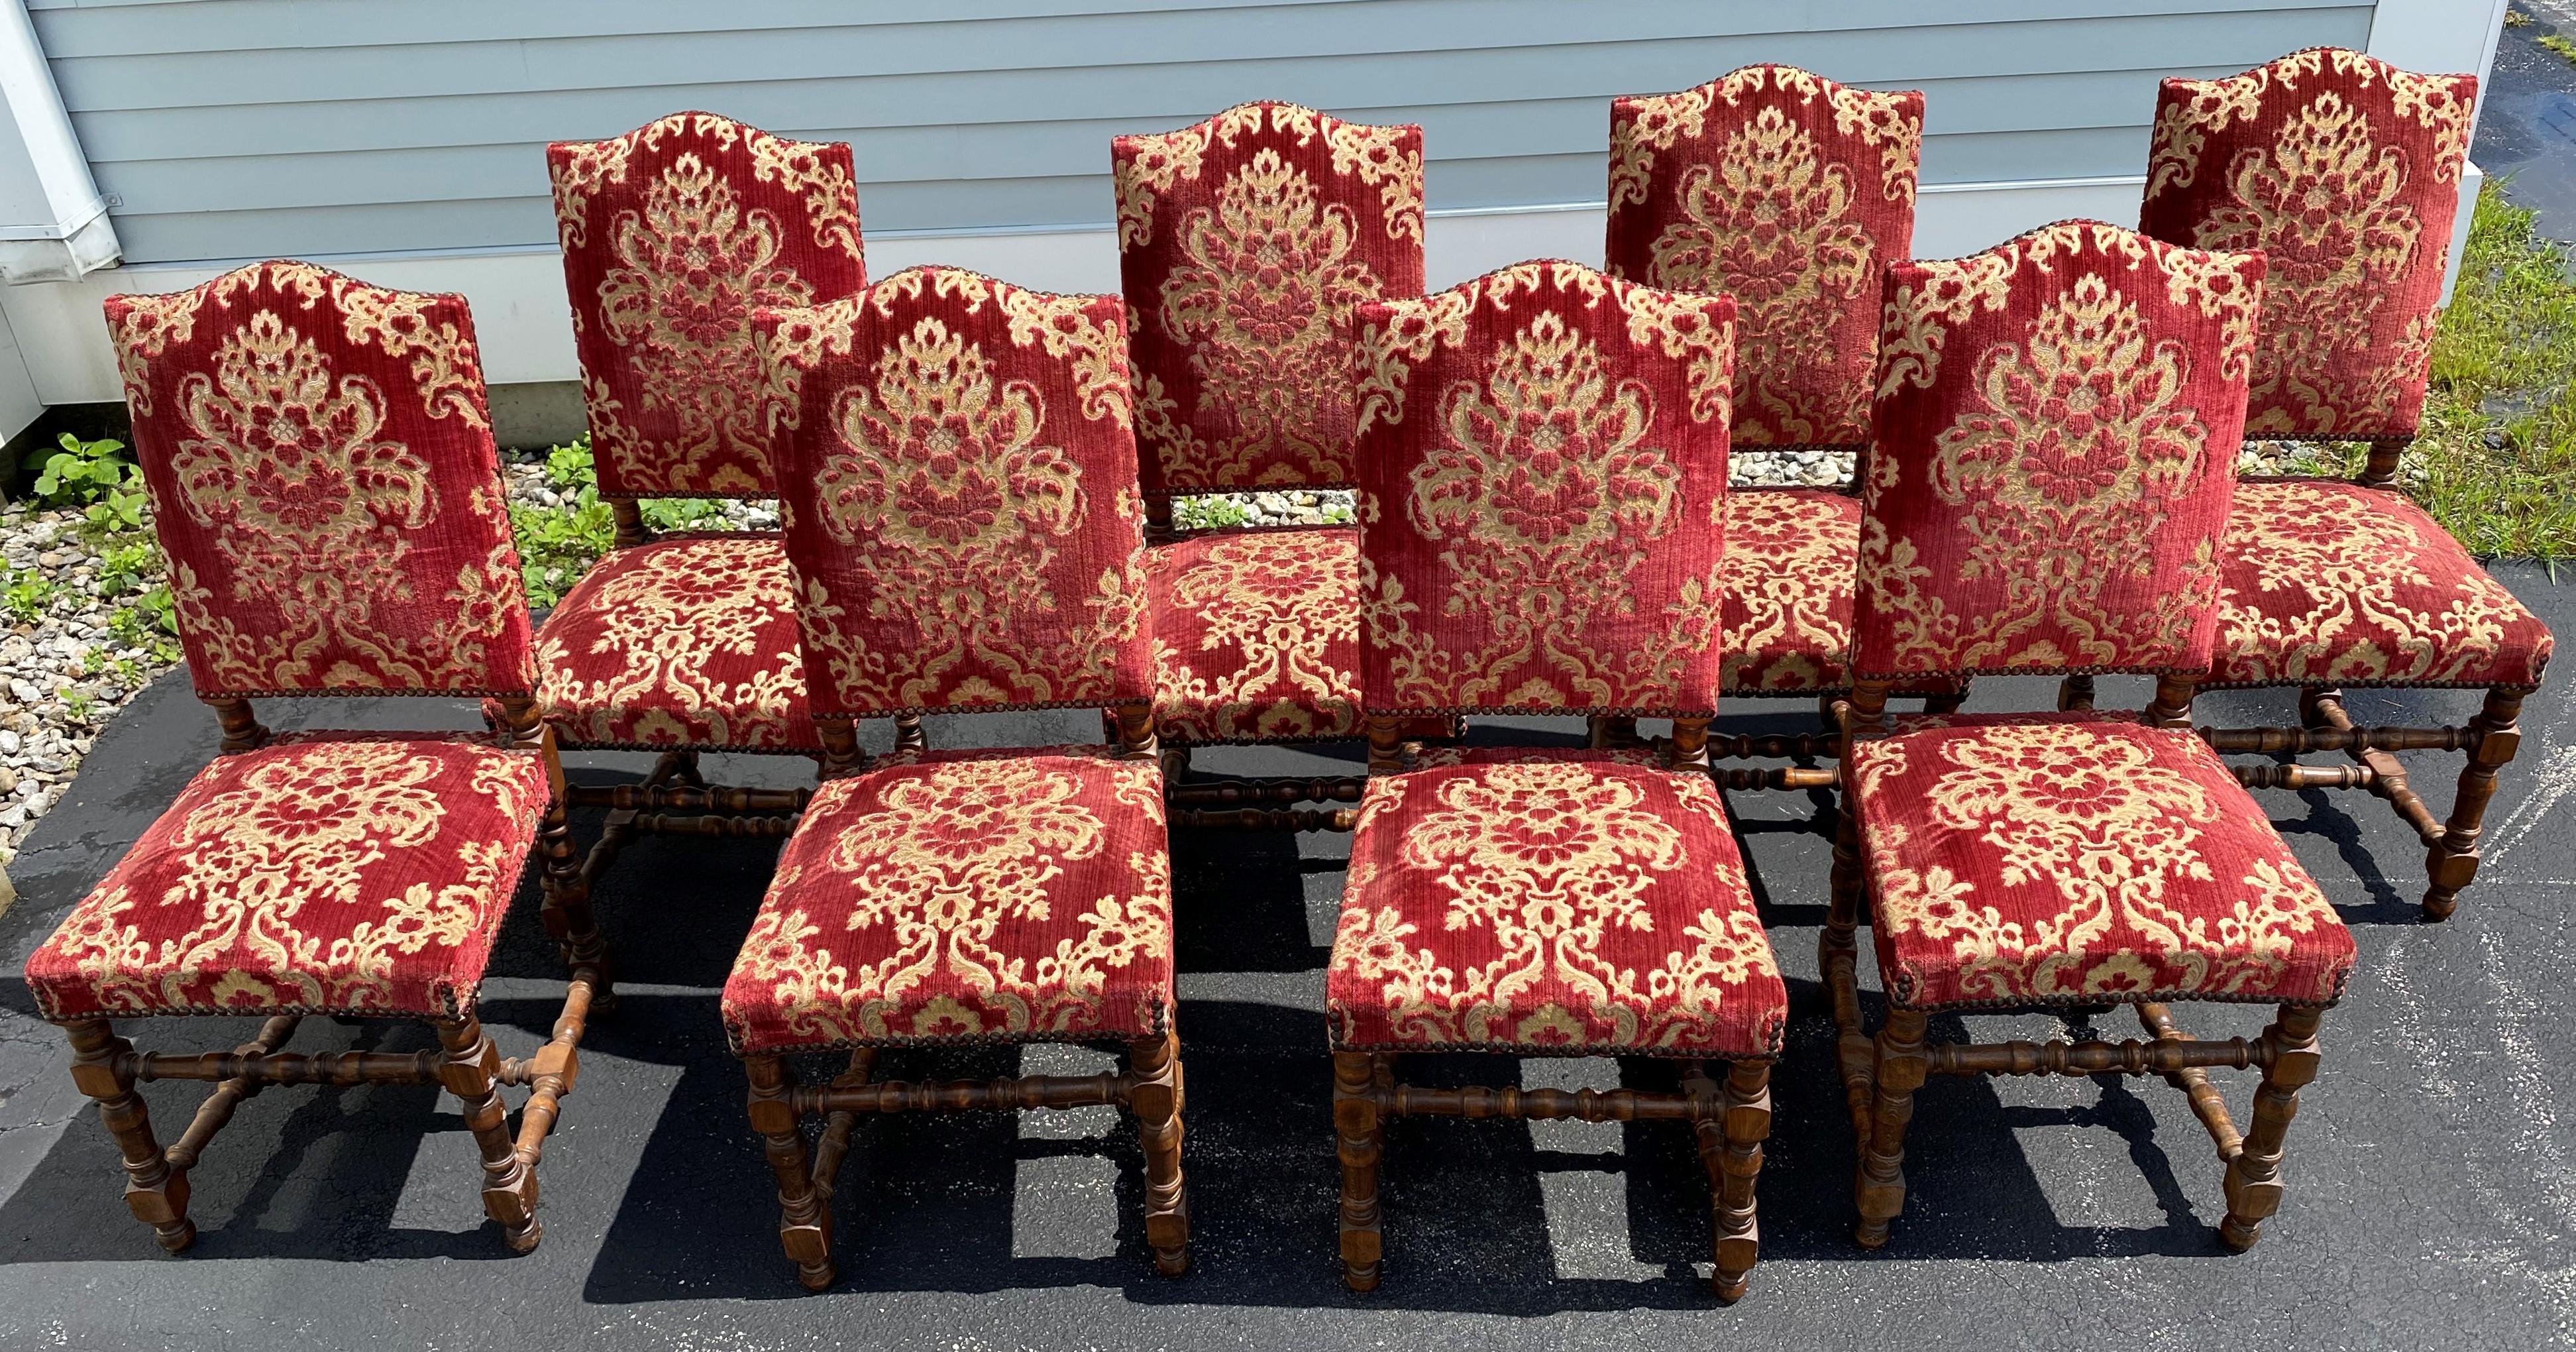 A fine set of Louis XIII style walnut side chairs in floral red velour upholstery with nail finish border, padded backs, arched crest, and nicely turned legs with H form stretchers. The set is French in origin, dating to the 19th century, and is in